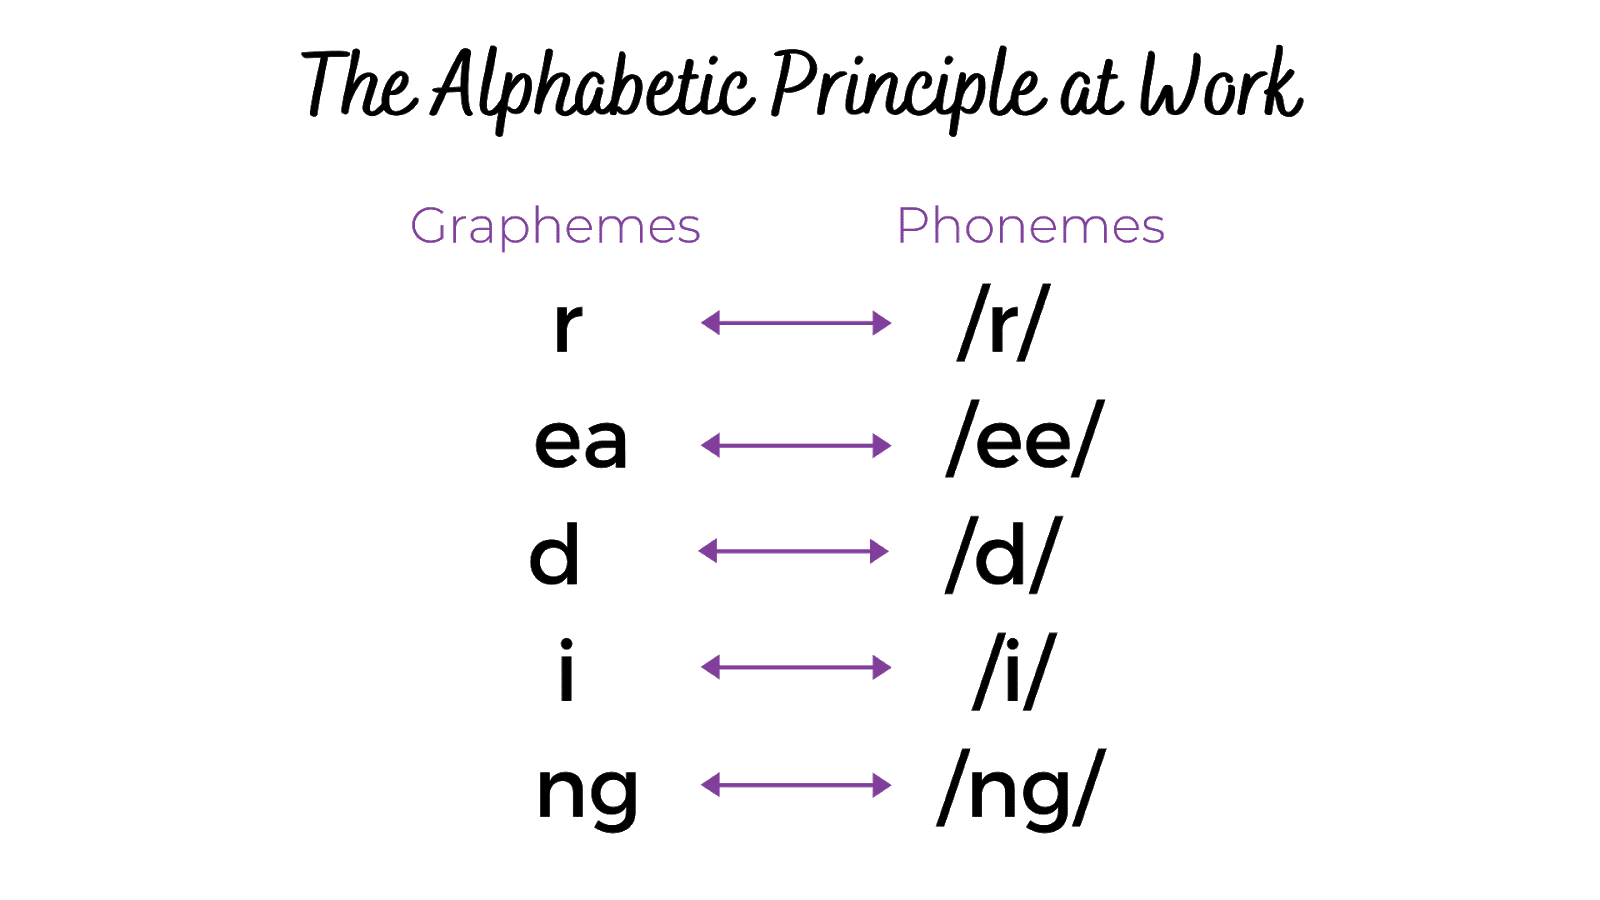 The Alphabetic Principle at work. Graphemes in a column on the left and phonemes in a column on the right. letter r to /r/ sound, letters e and a to /ee/ sound etc.